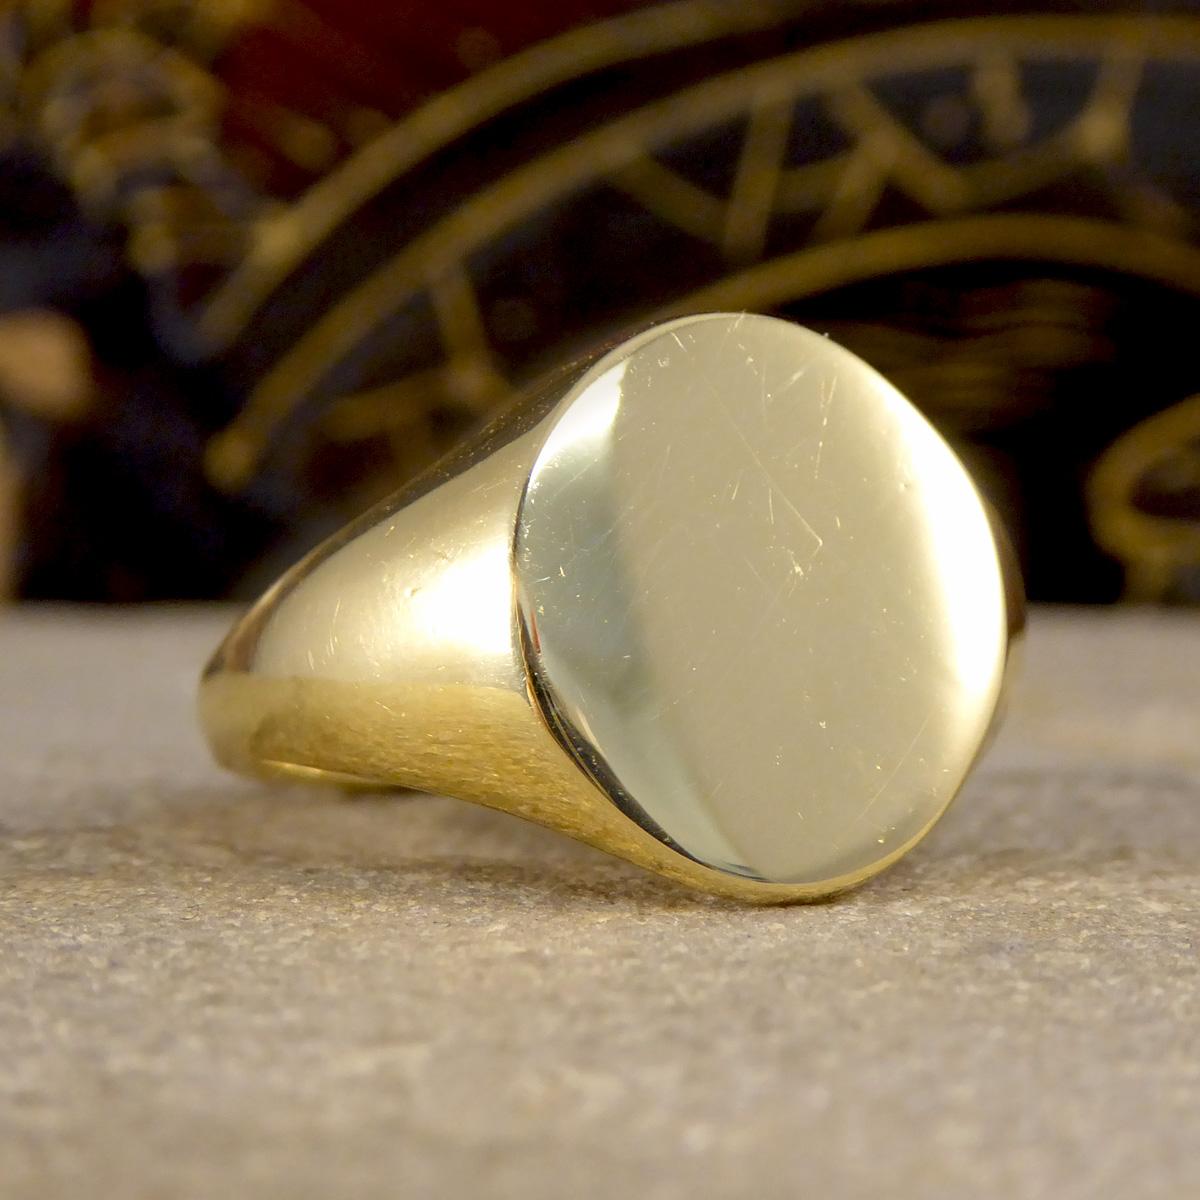 The signet ring is a classic and staple addition to any mans finger. It has become a universal unisex ring now and most commonly worn on the pinky finger. This ring was crafted from 18ct Yellow Gold with a plain circular face measuring 15mm by